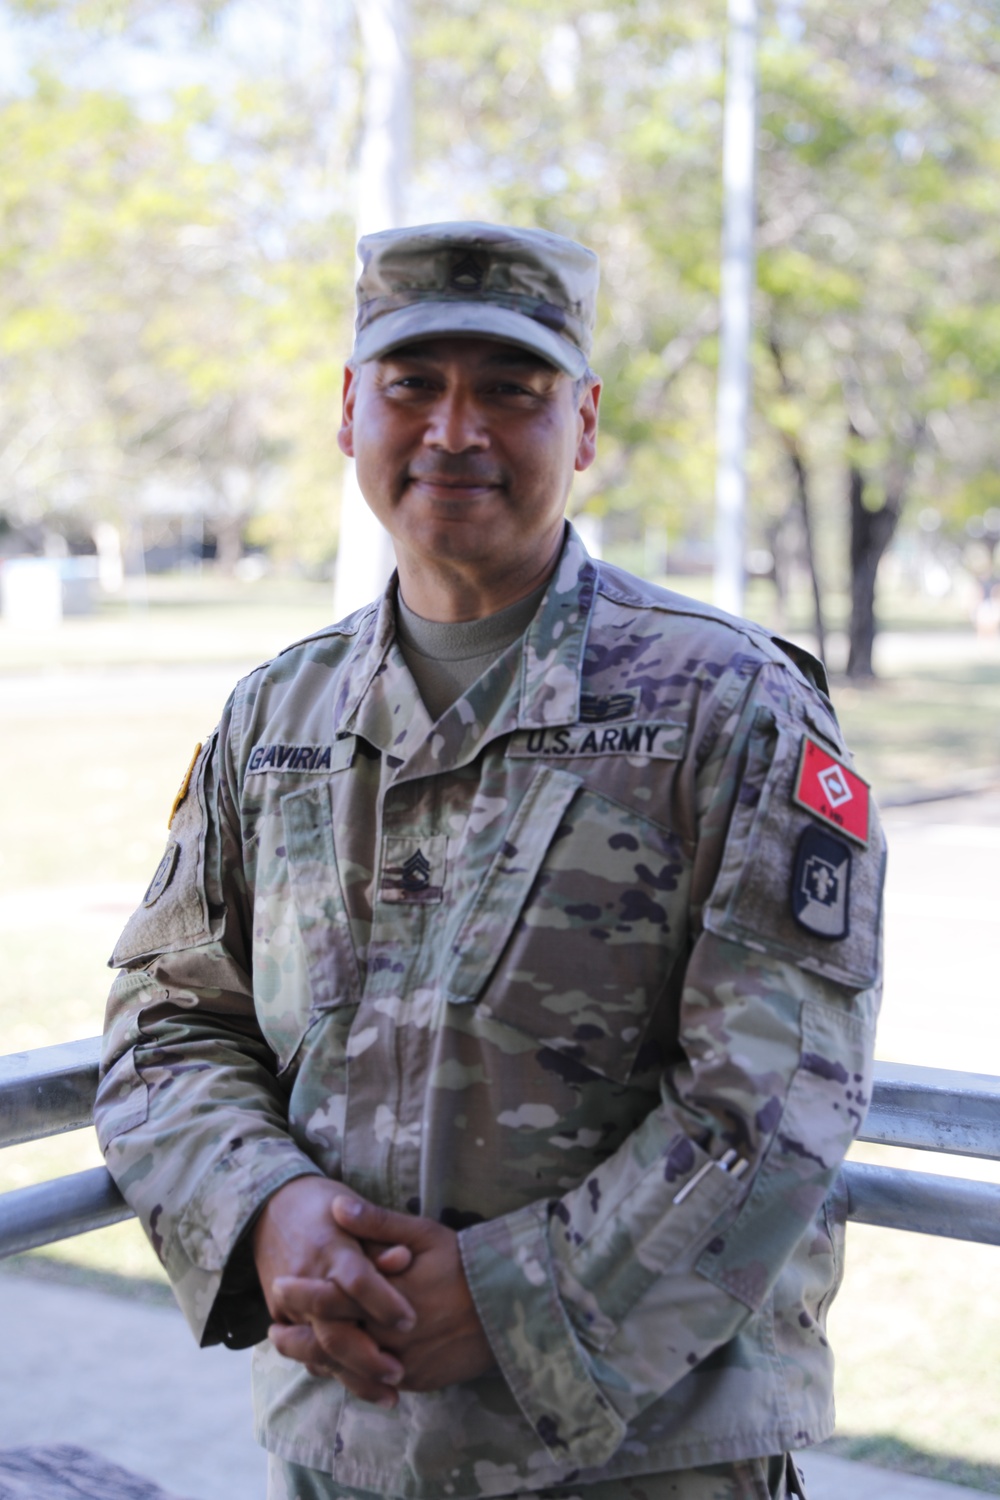 Sgt. First Class Gaviria Share’s How 20 Years of Service has Prepared Him for Talisman Sabre 23